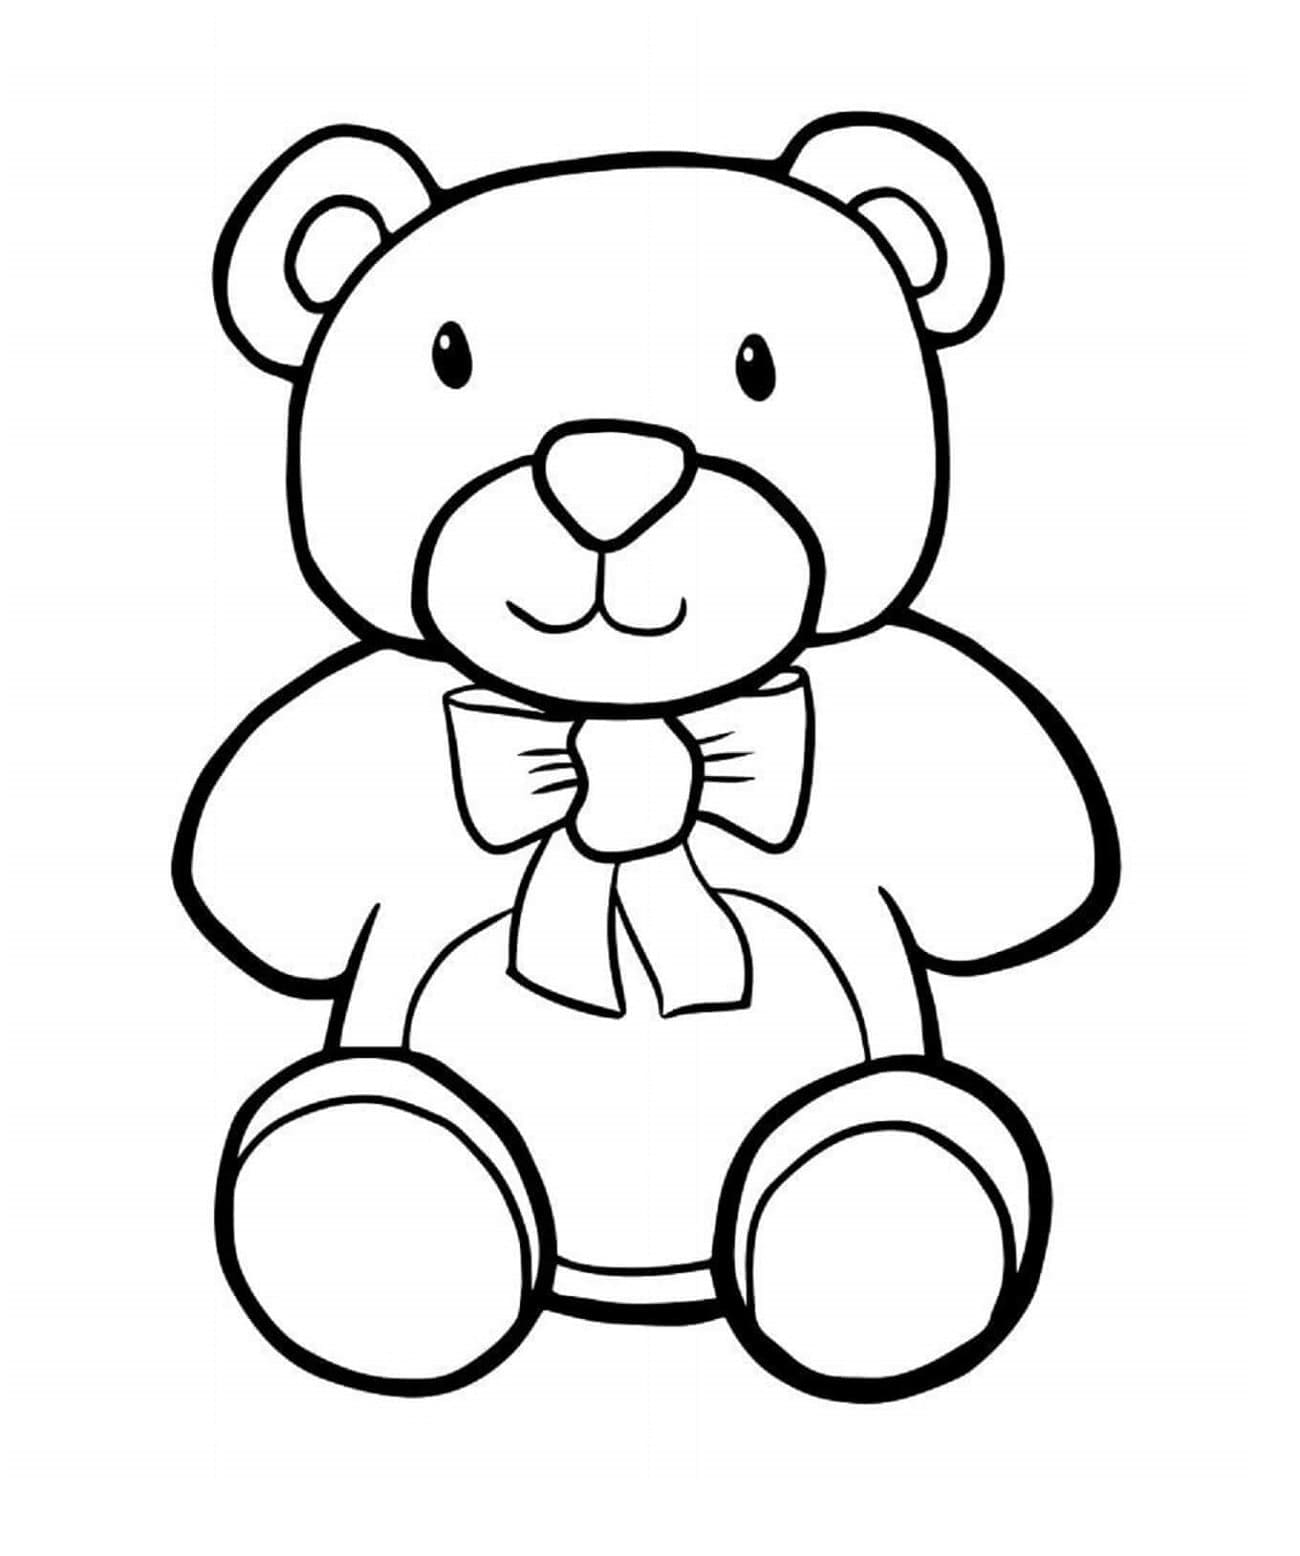 Printable Teddy Bear Free Images Coloring Page